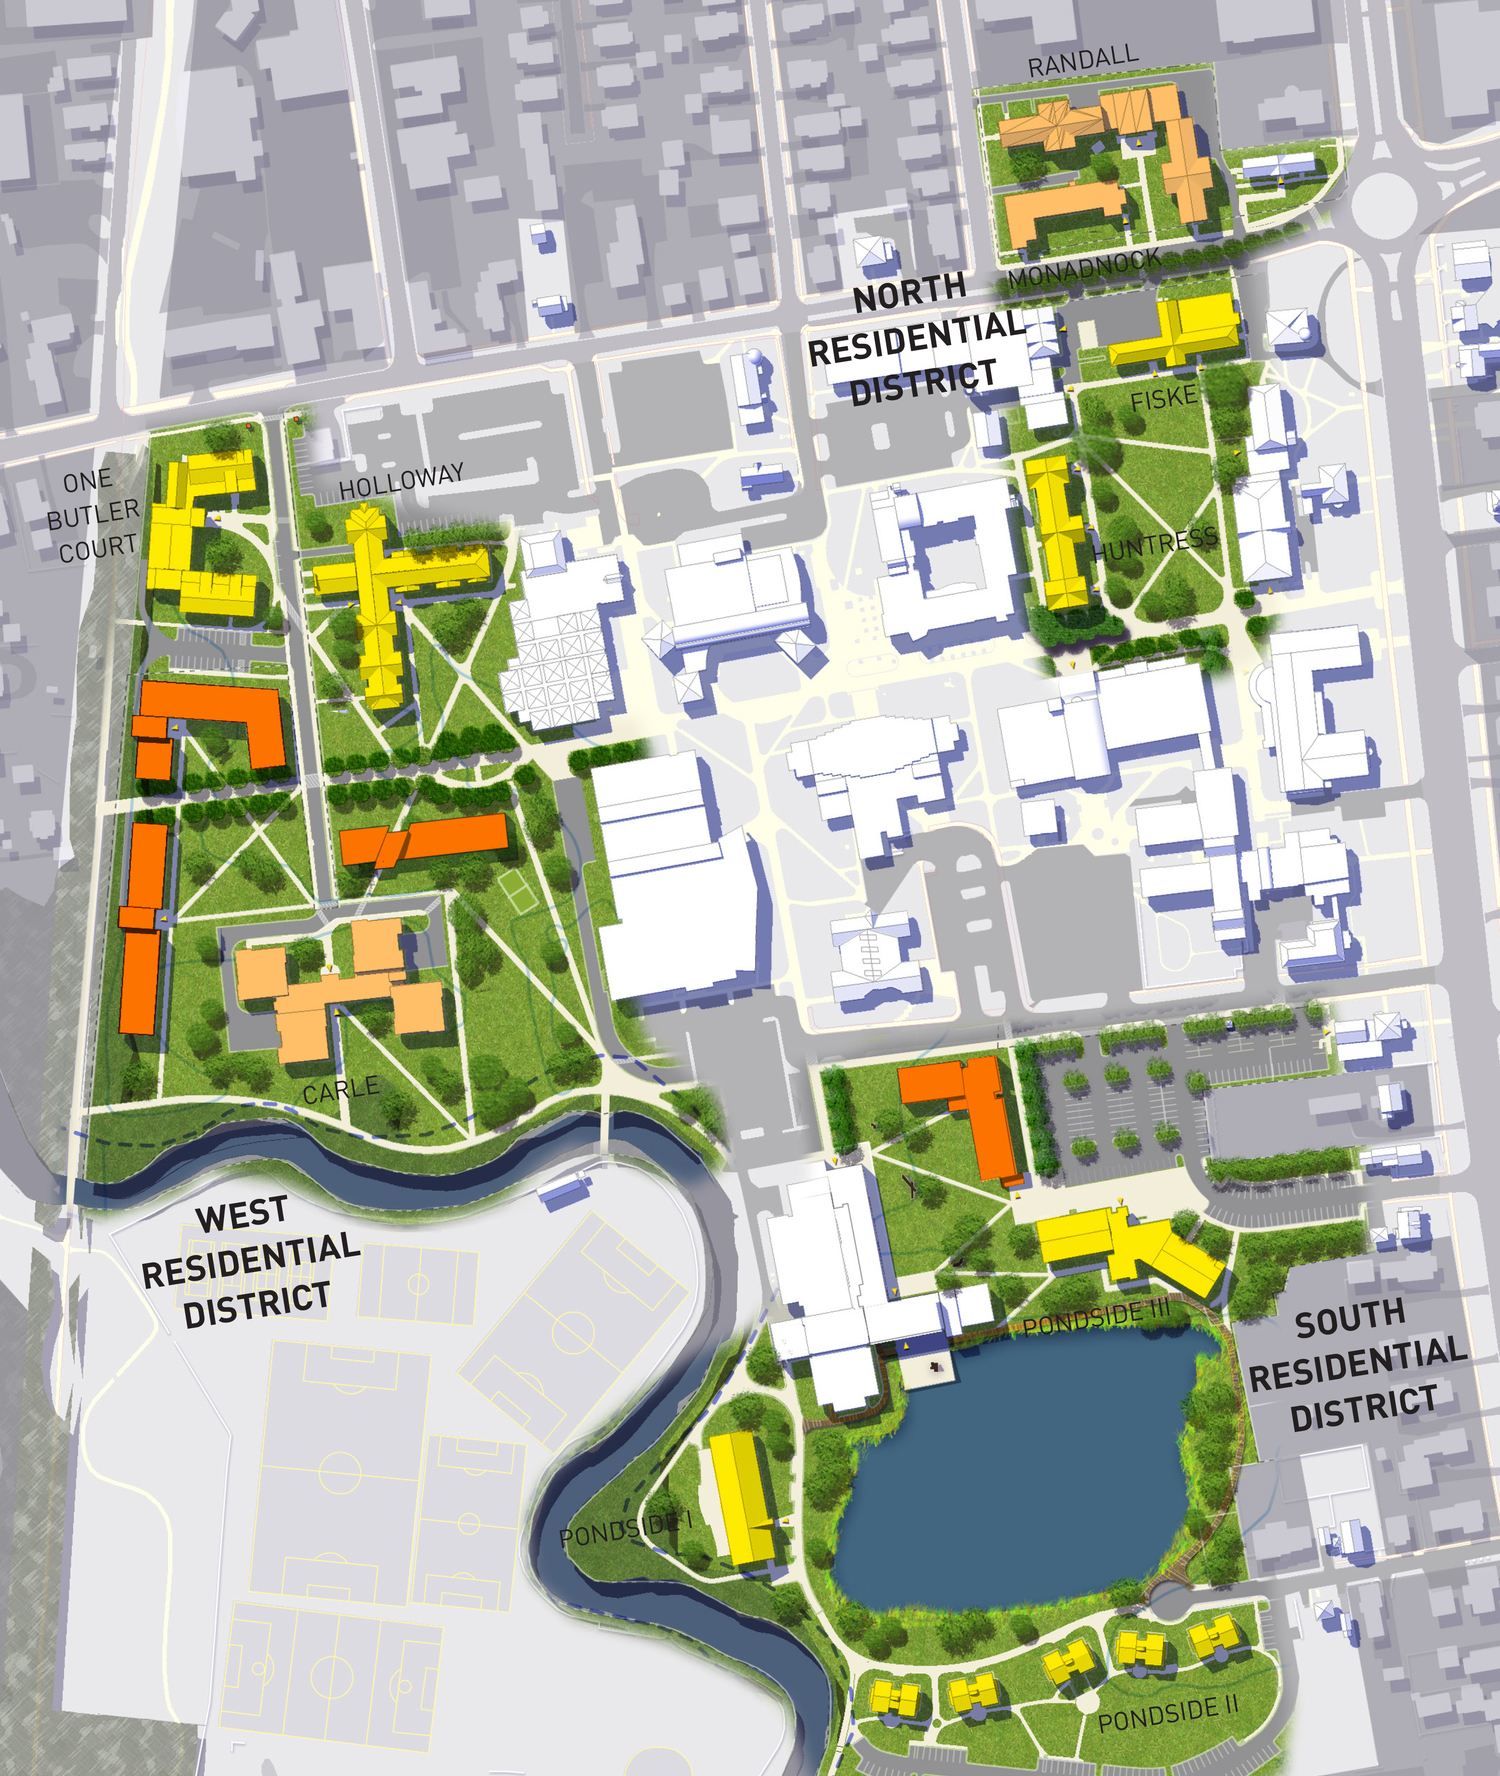 keene state college map Foroffice Keene State College Campus Map Pdf